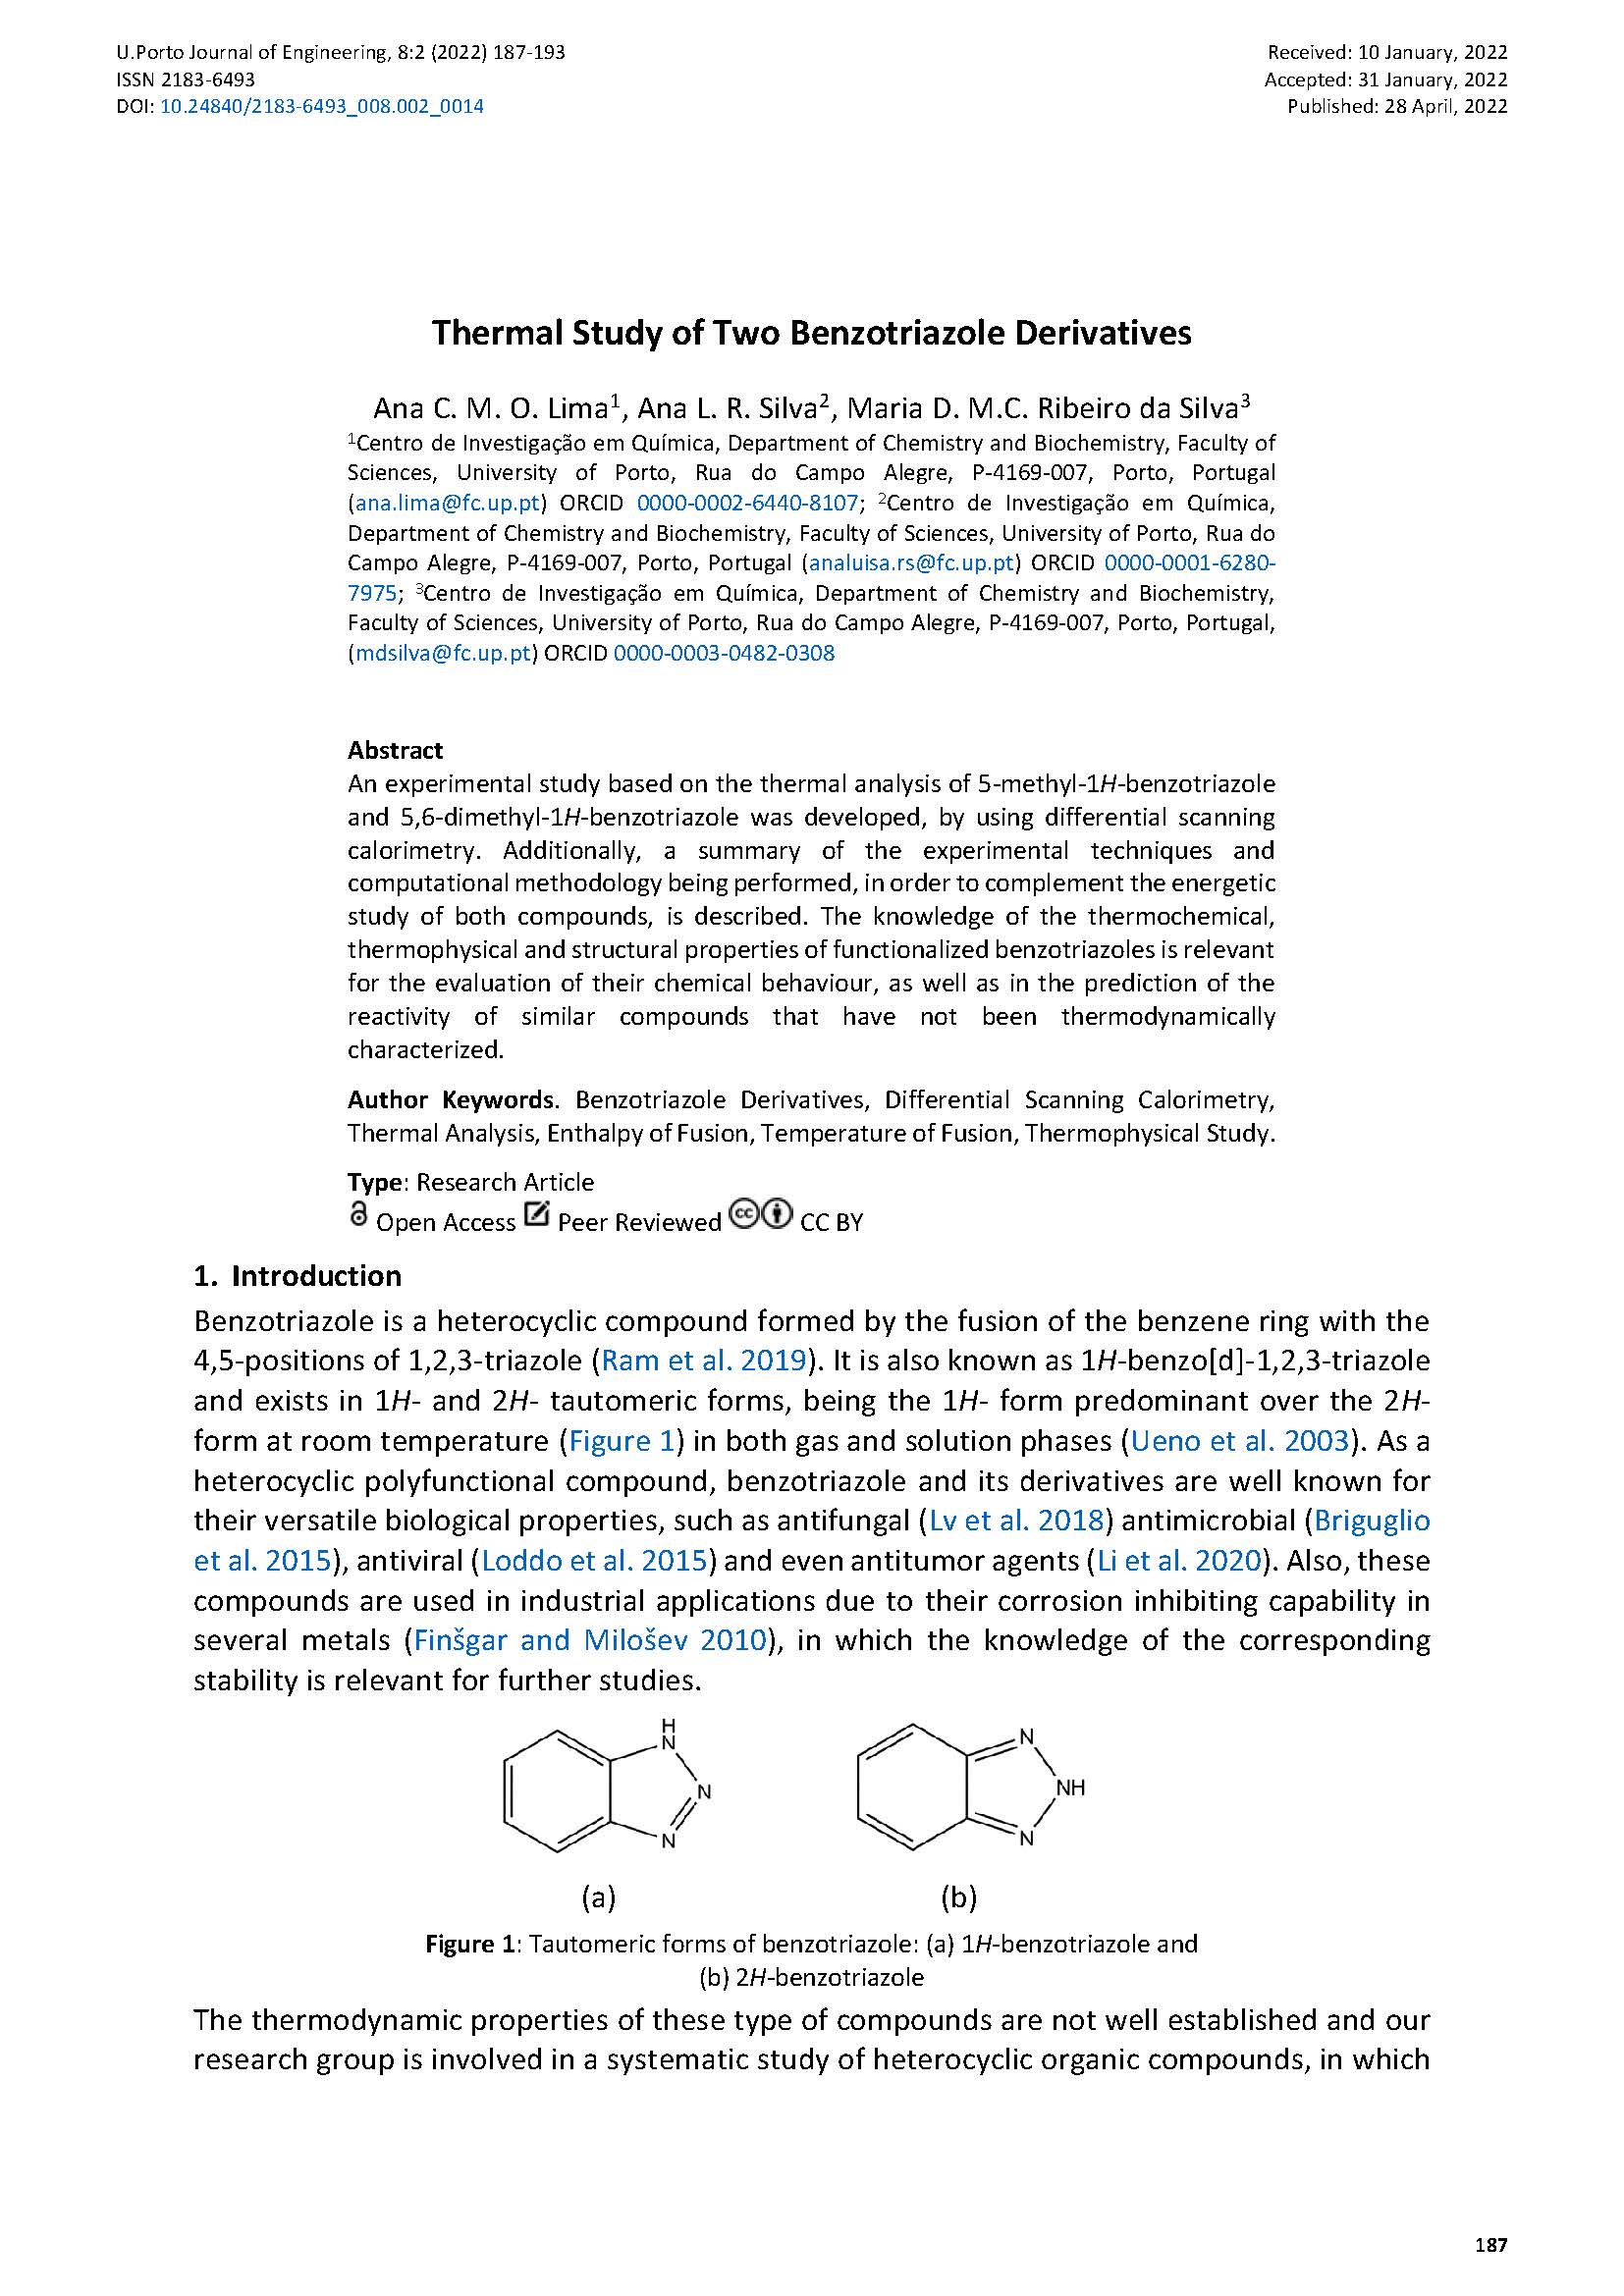 Thermal Study of Two Benzotriazole Derivatives